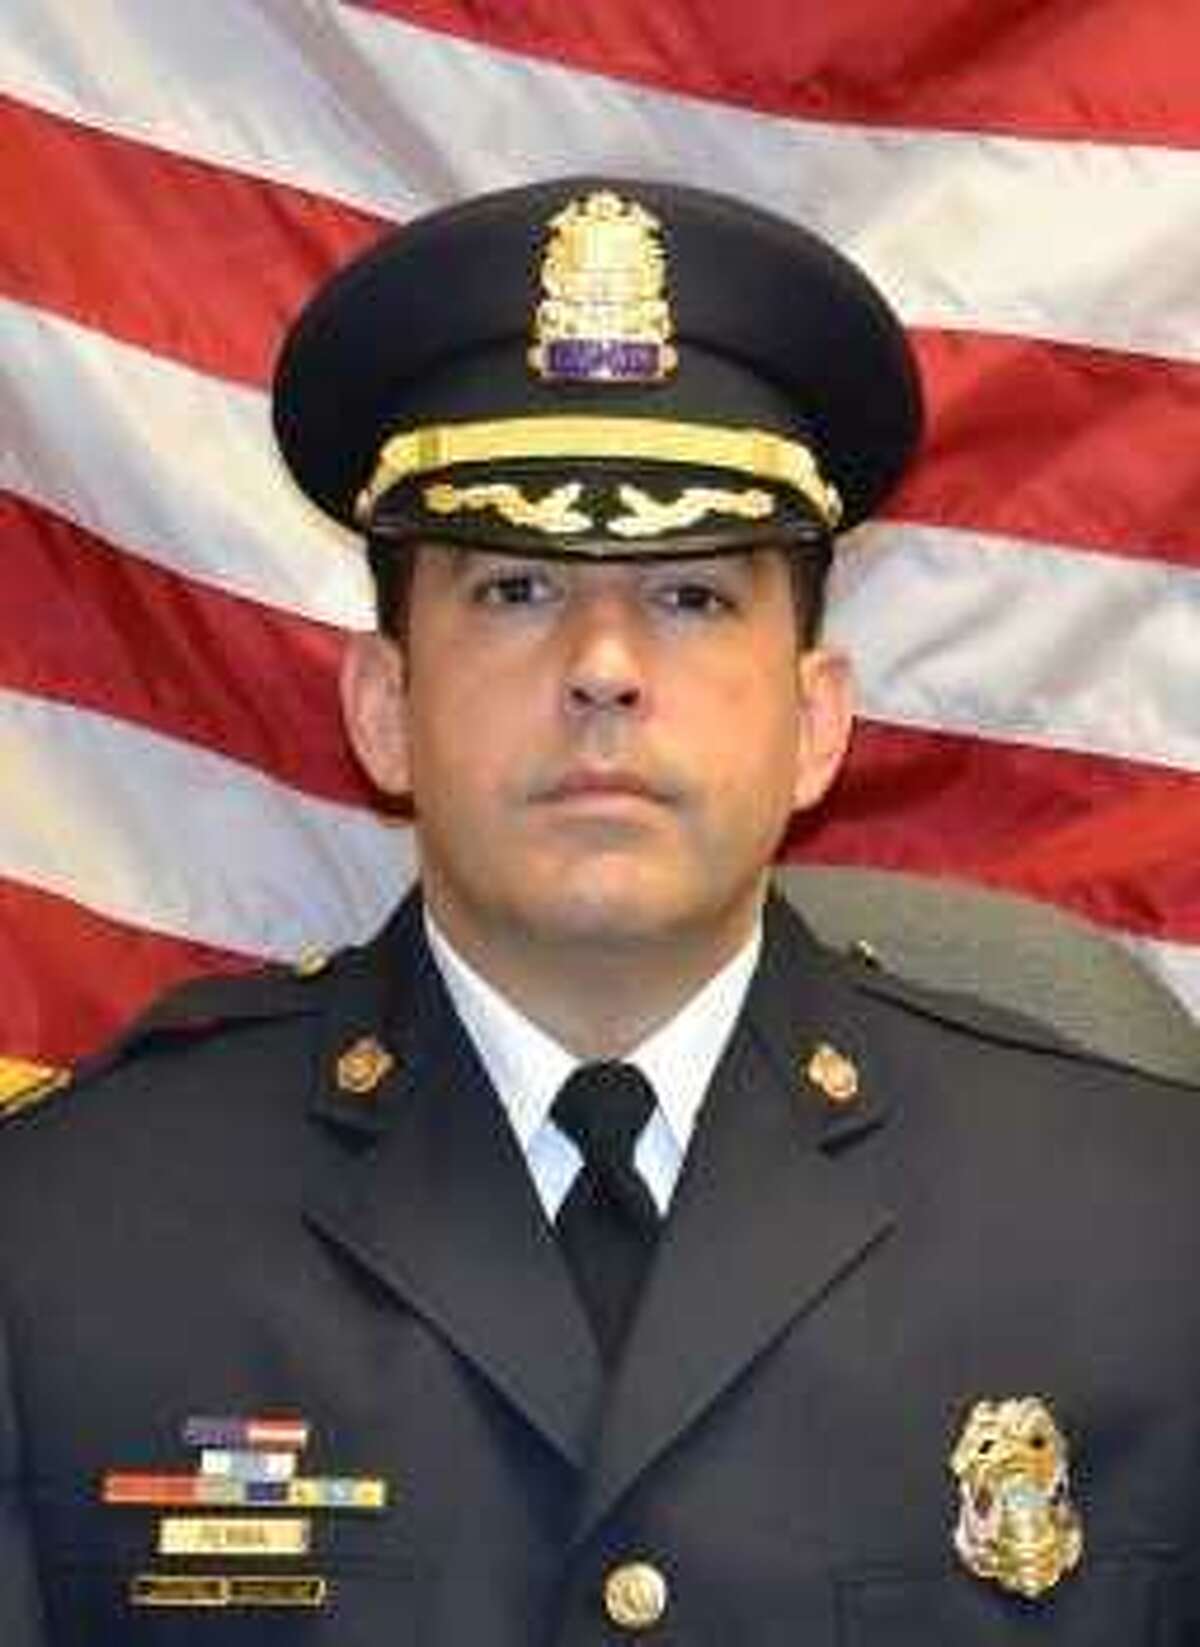 Westport Police Department's Deputy Chief Vincent Penna died Friday at the age of 51.